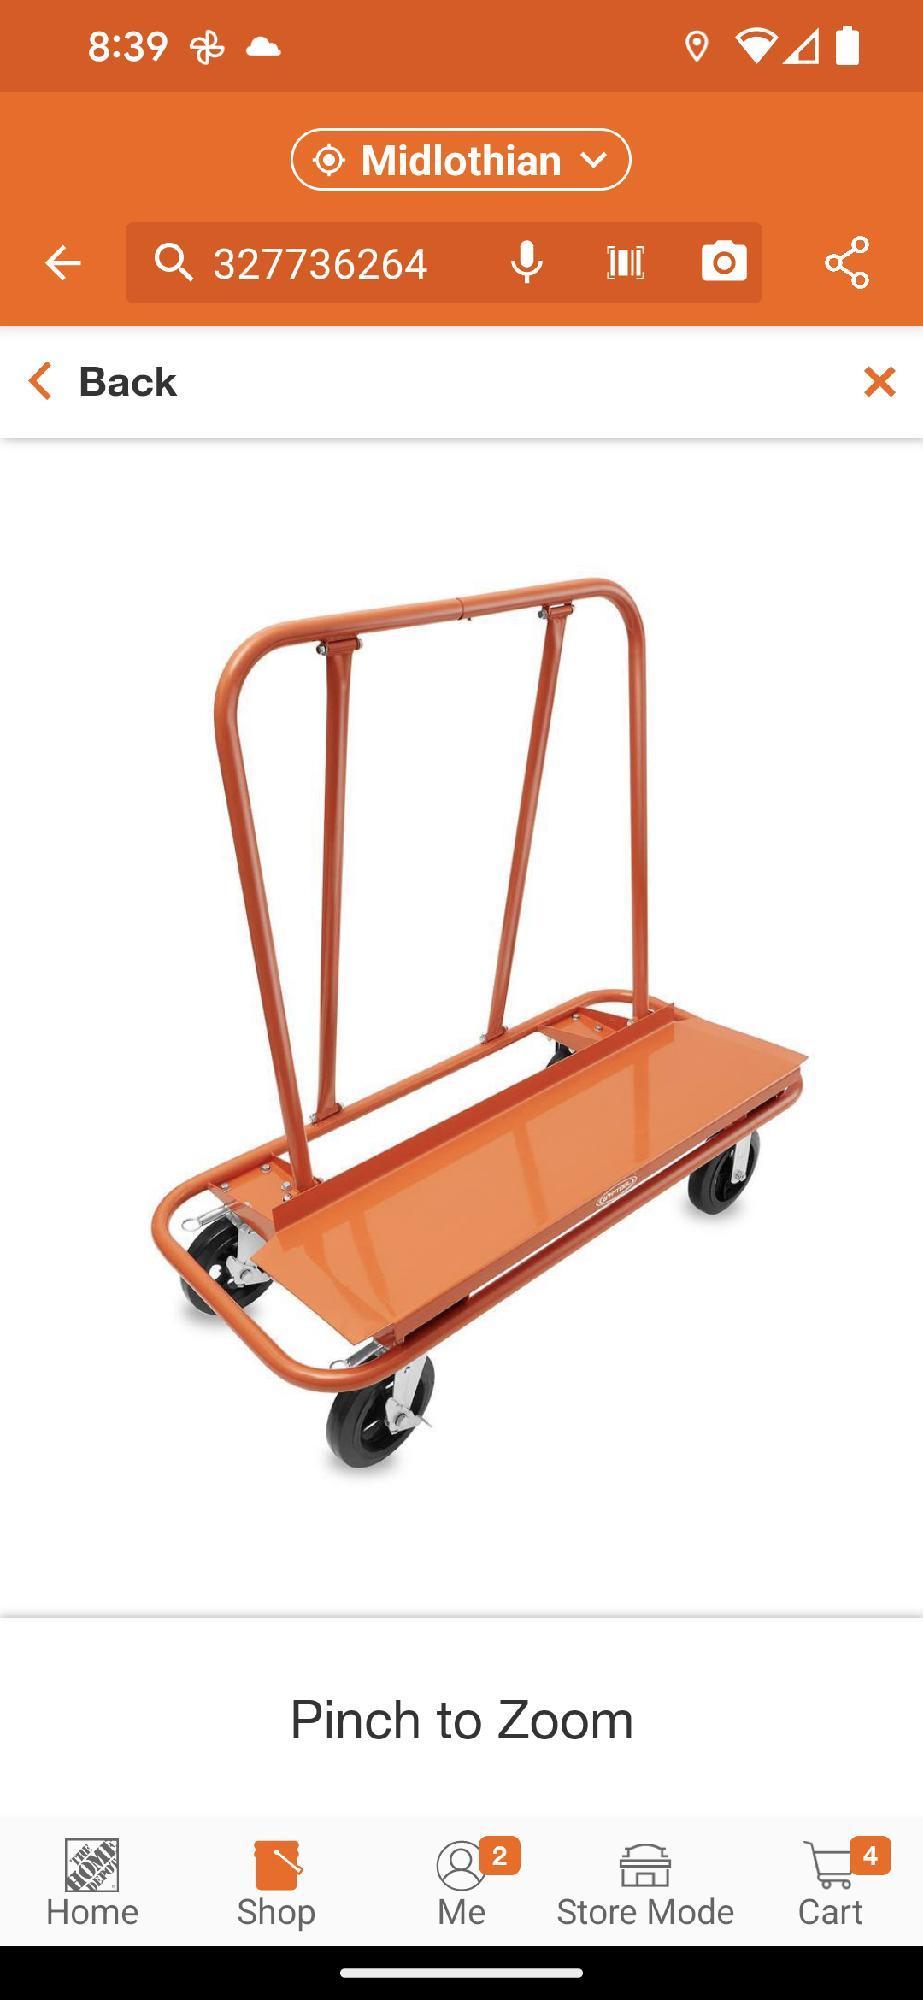 GYPTOOL Heavy-Duty Drywall Cart with 1,800 lbs. Load Capacity, Appears to be New in Factory Banded